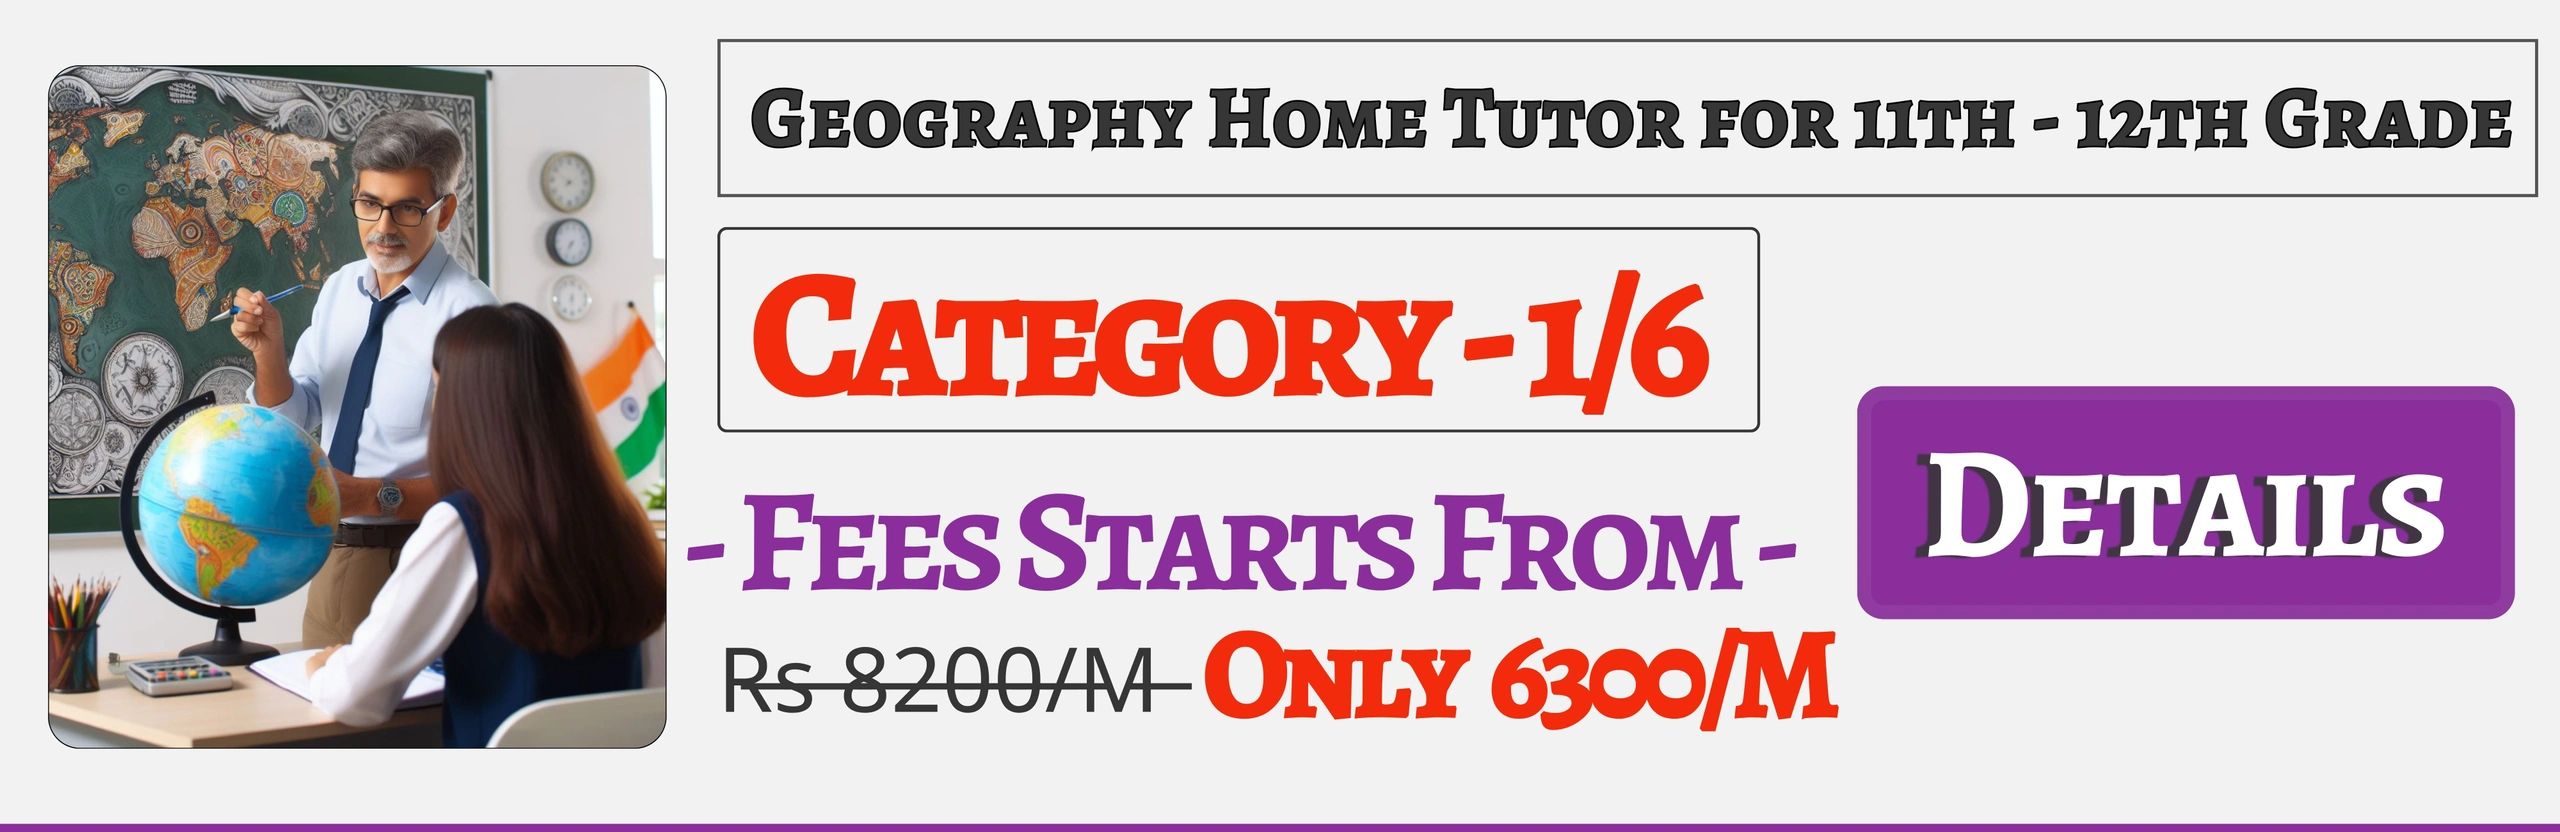 Book Best Nearby Geography Home Tuition Tutors For 11th & 12th In Jaipur , Fees Only 6300/M